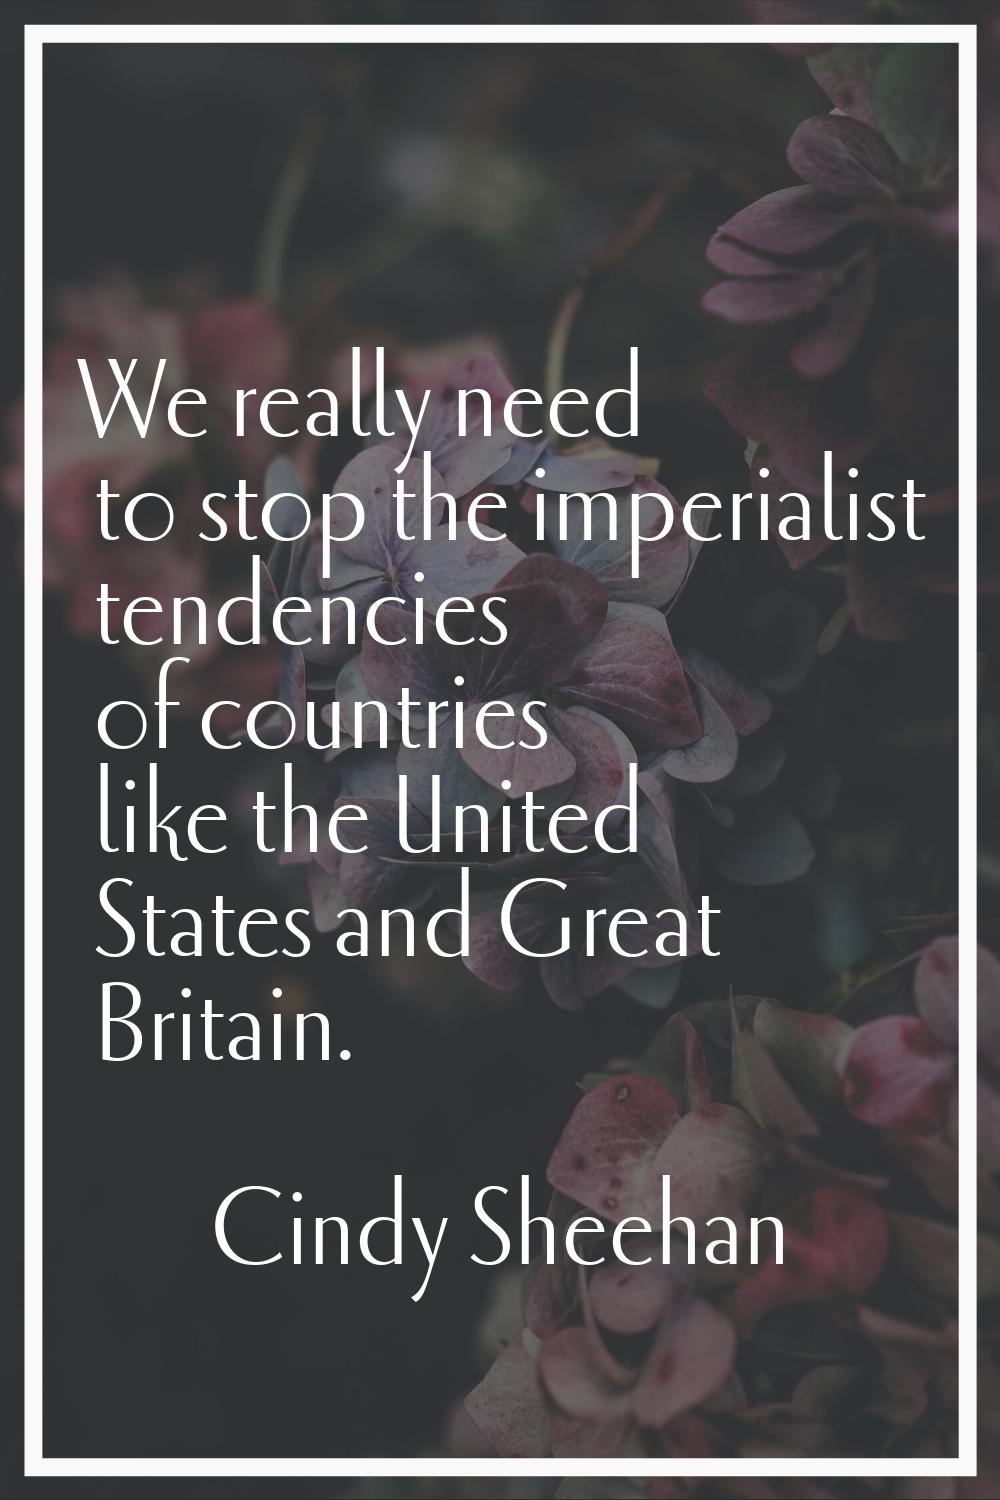 We really need to stop the imperialist tendencies of countries like the United States and Great Bri